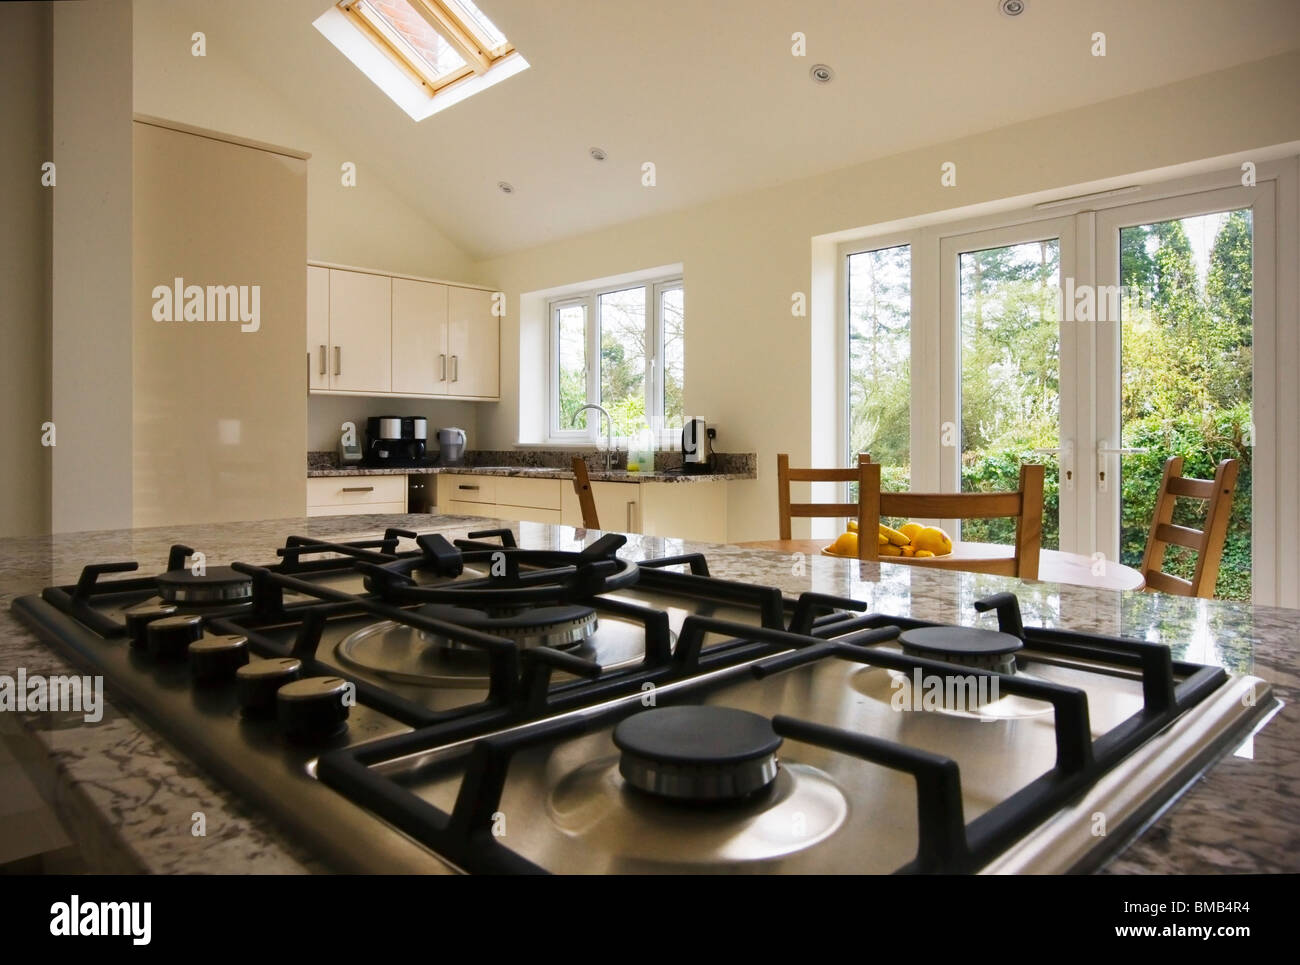 Wide Angle View Of A New Modern Kitchen Extension With Vaulted